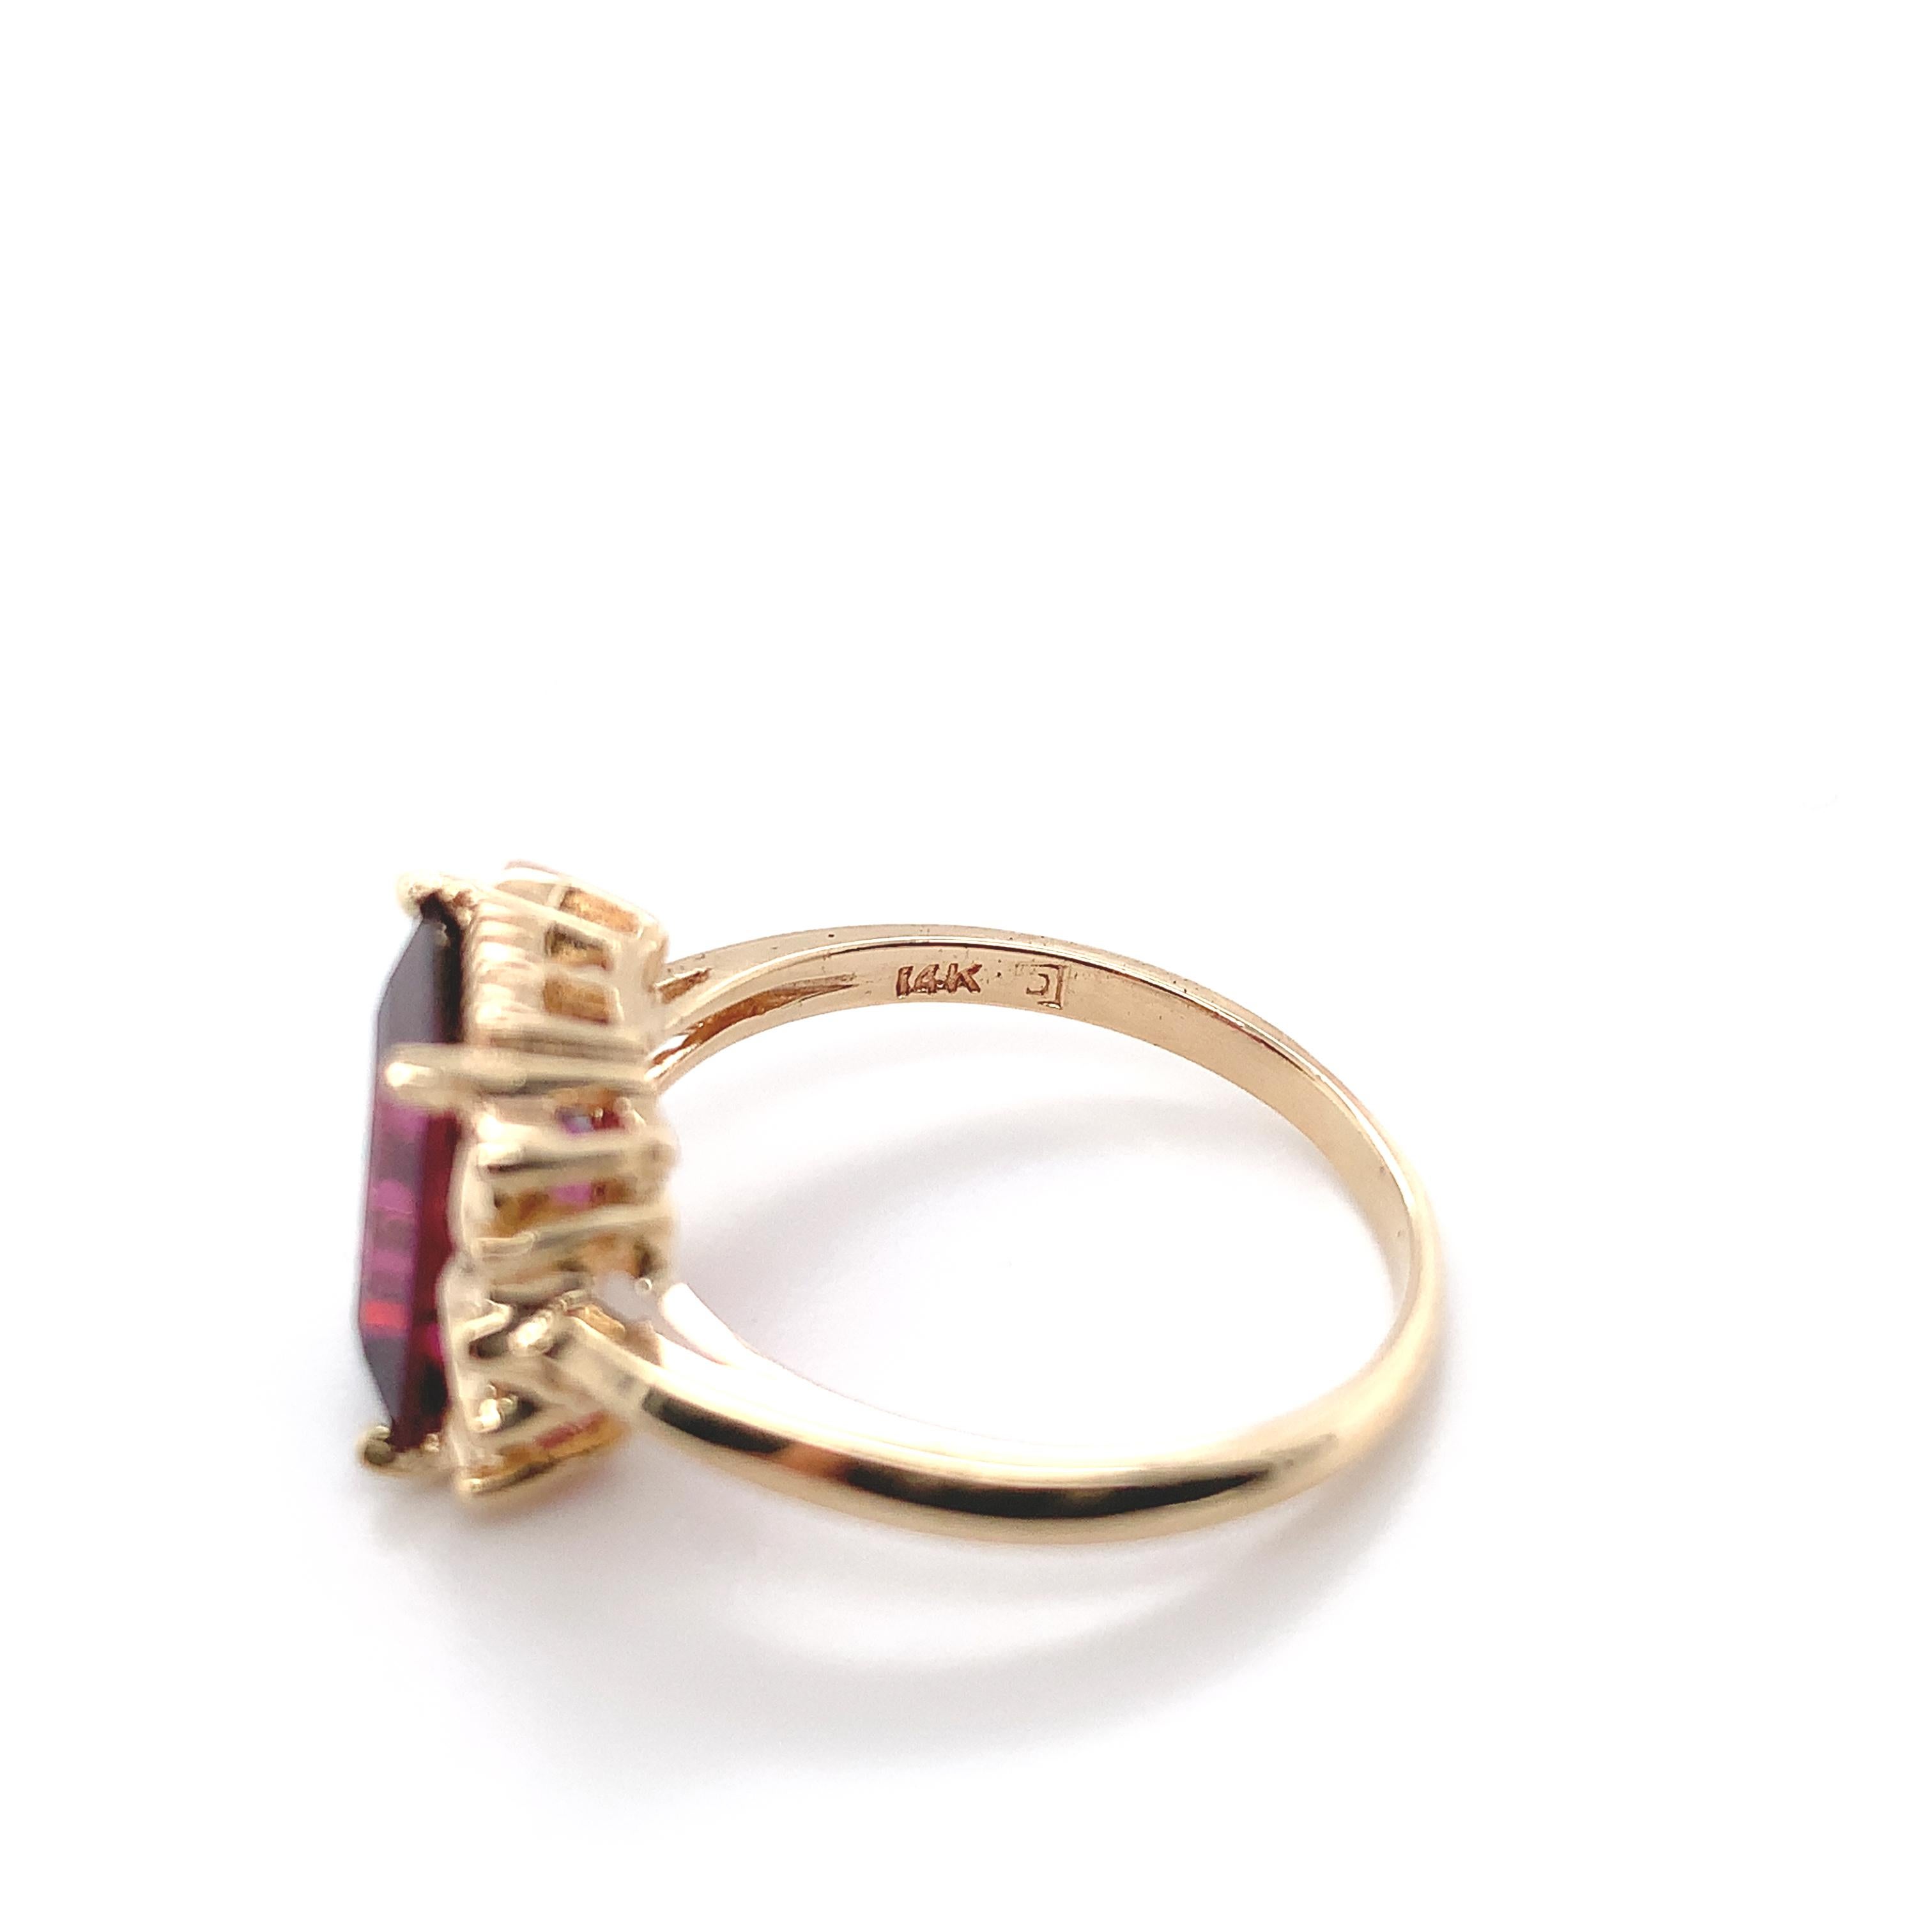 For Sale:  14K Yellow Gold Ring with Emerald Cut 3.51 carat Rhodolite Garnet 8